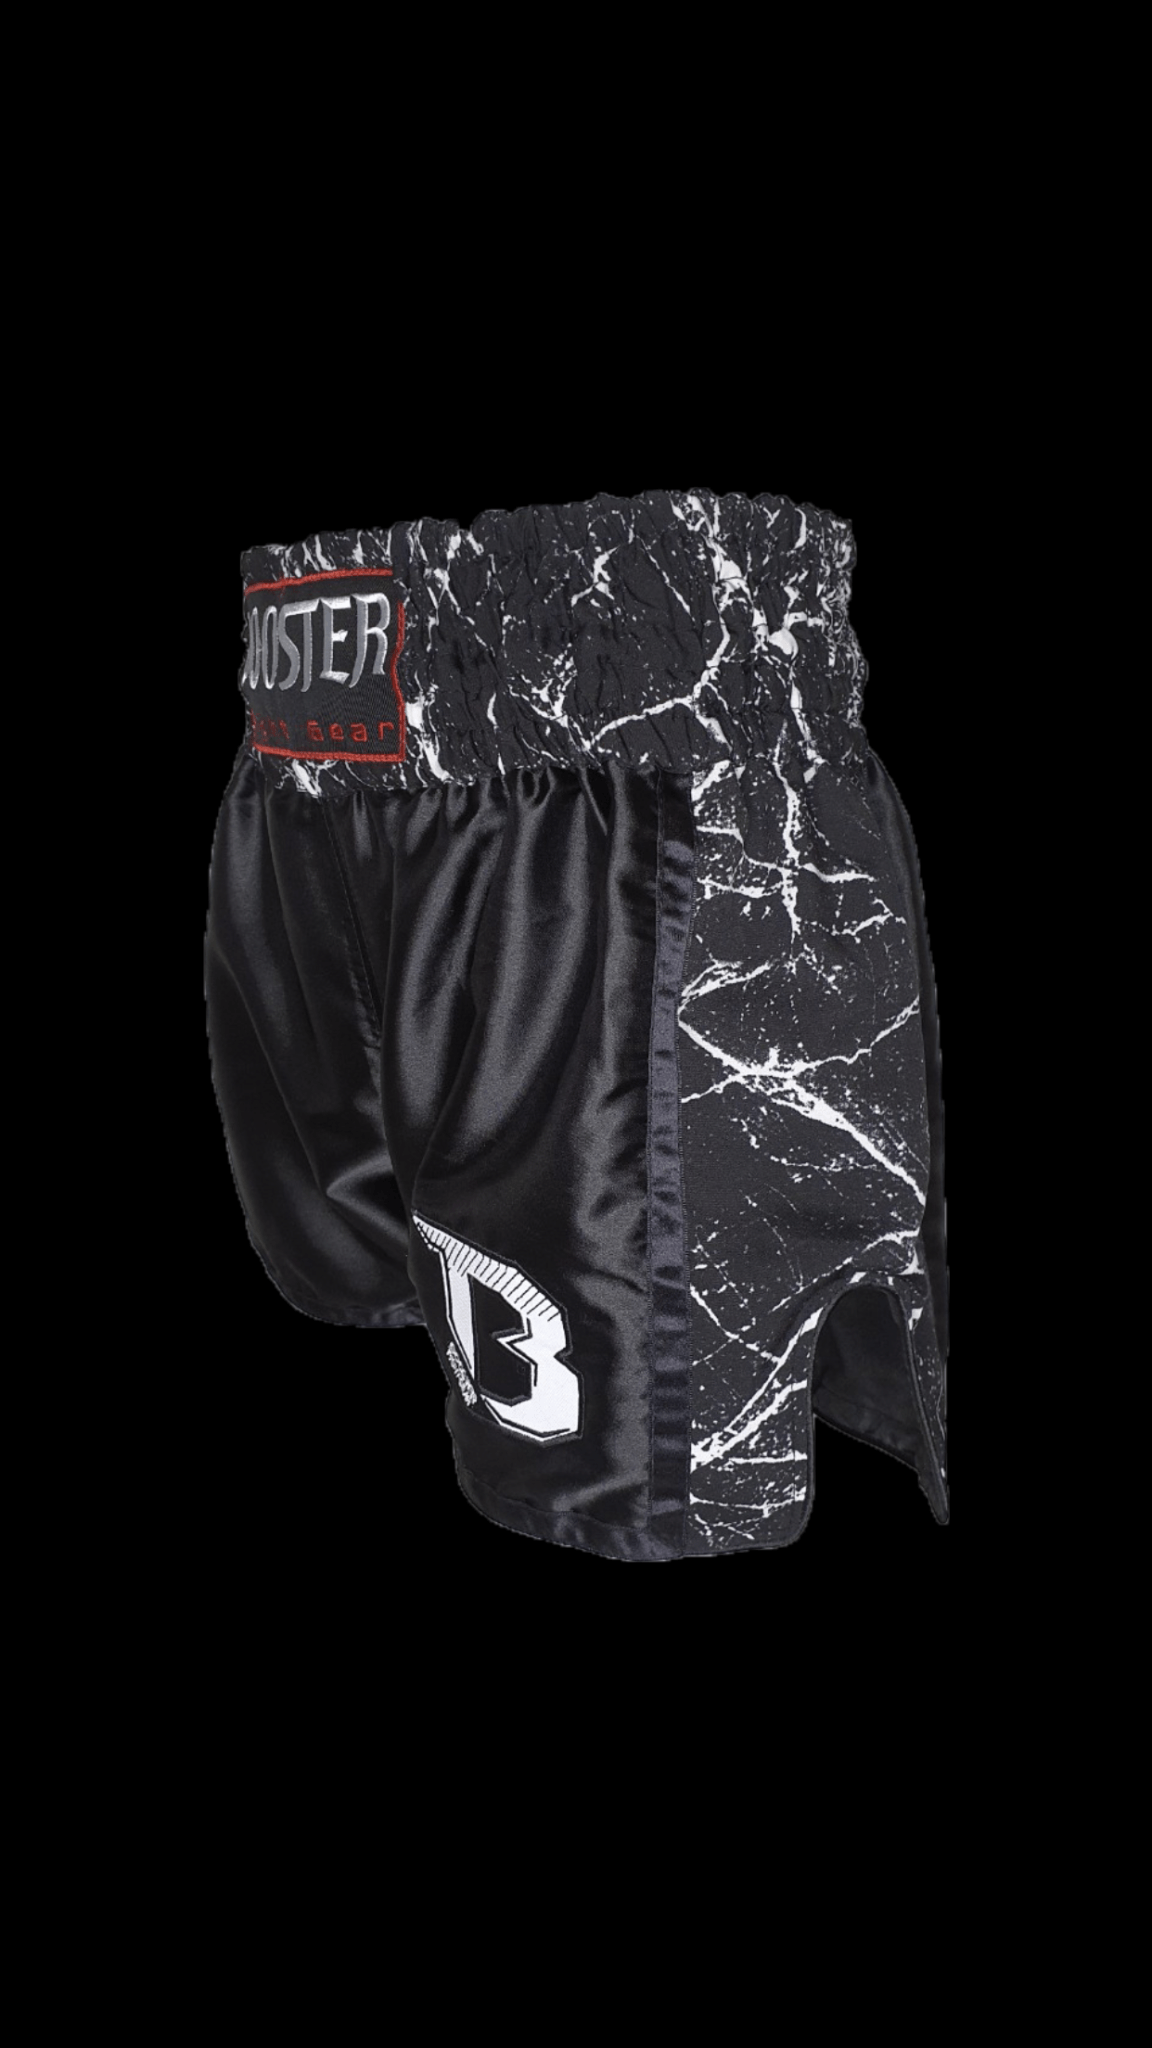 BOOSTER SHORTS TBT PRO 4.35 Booster